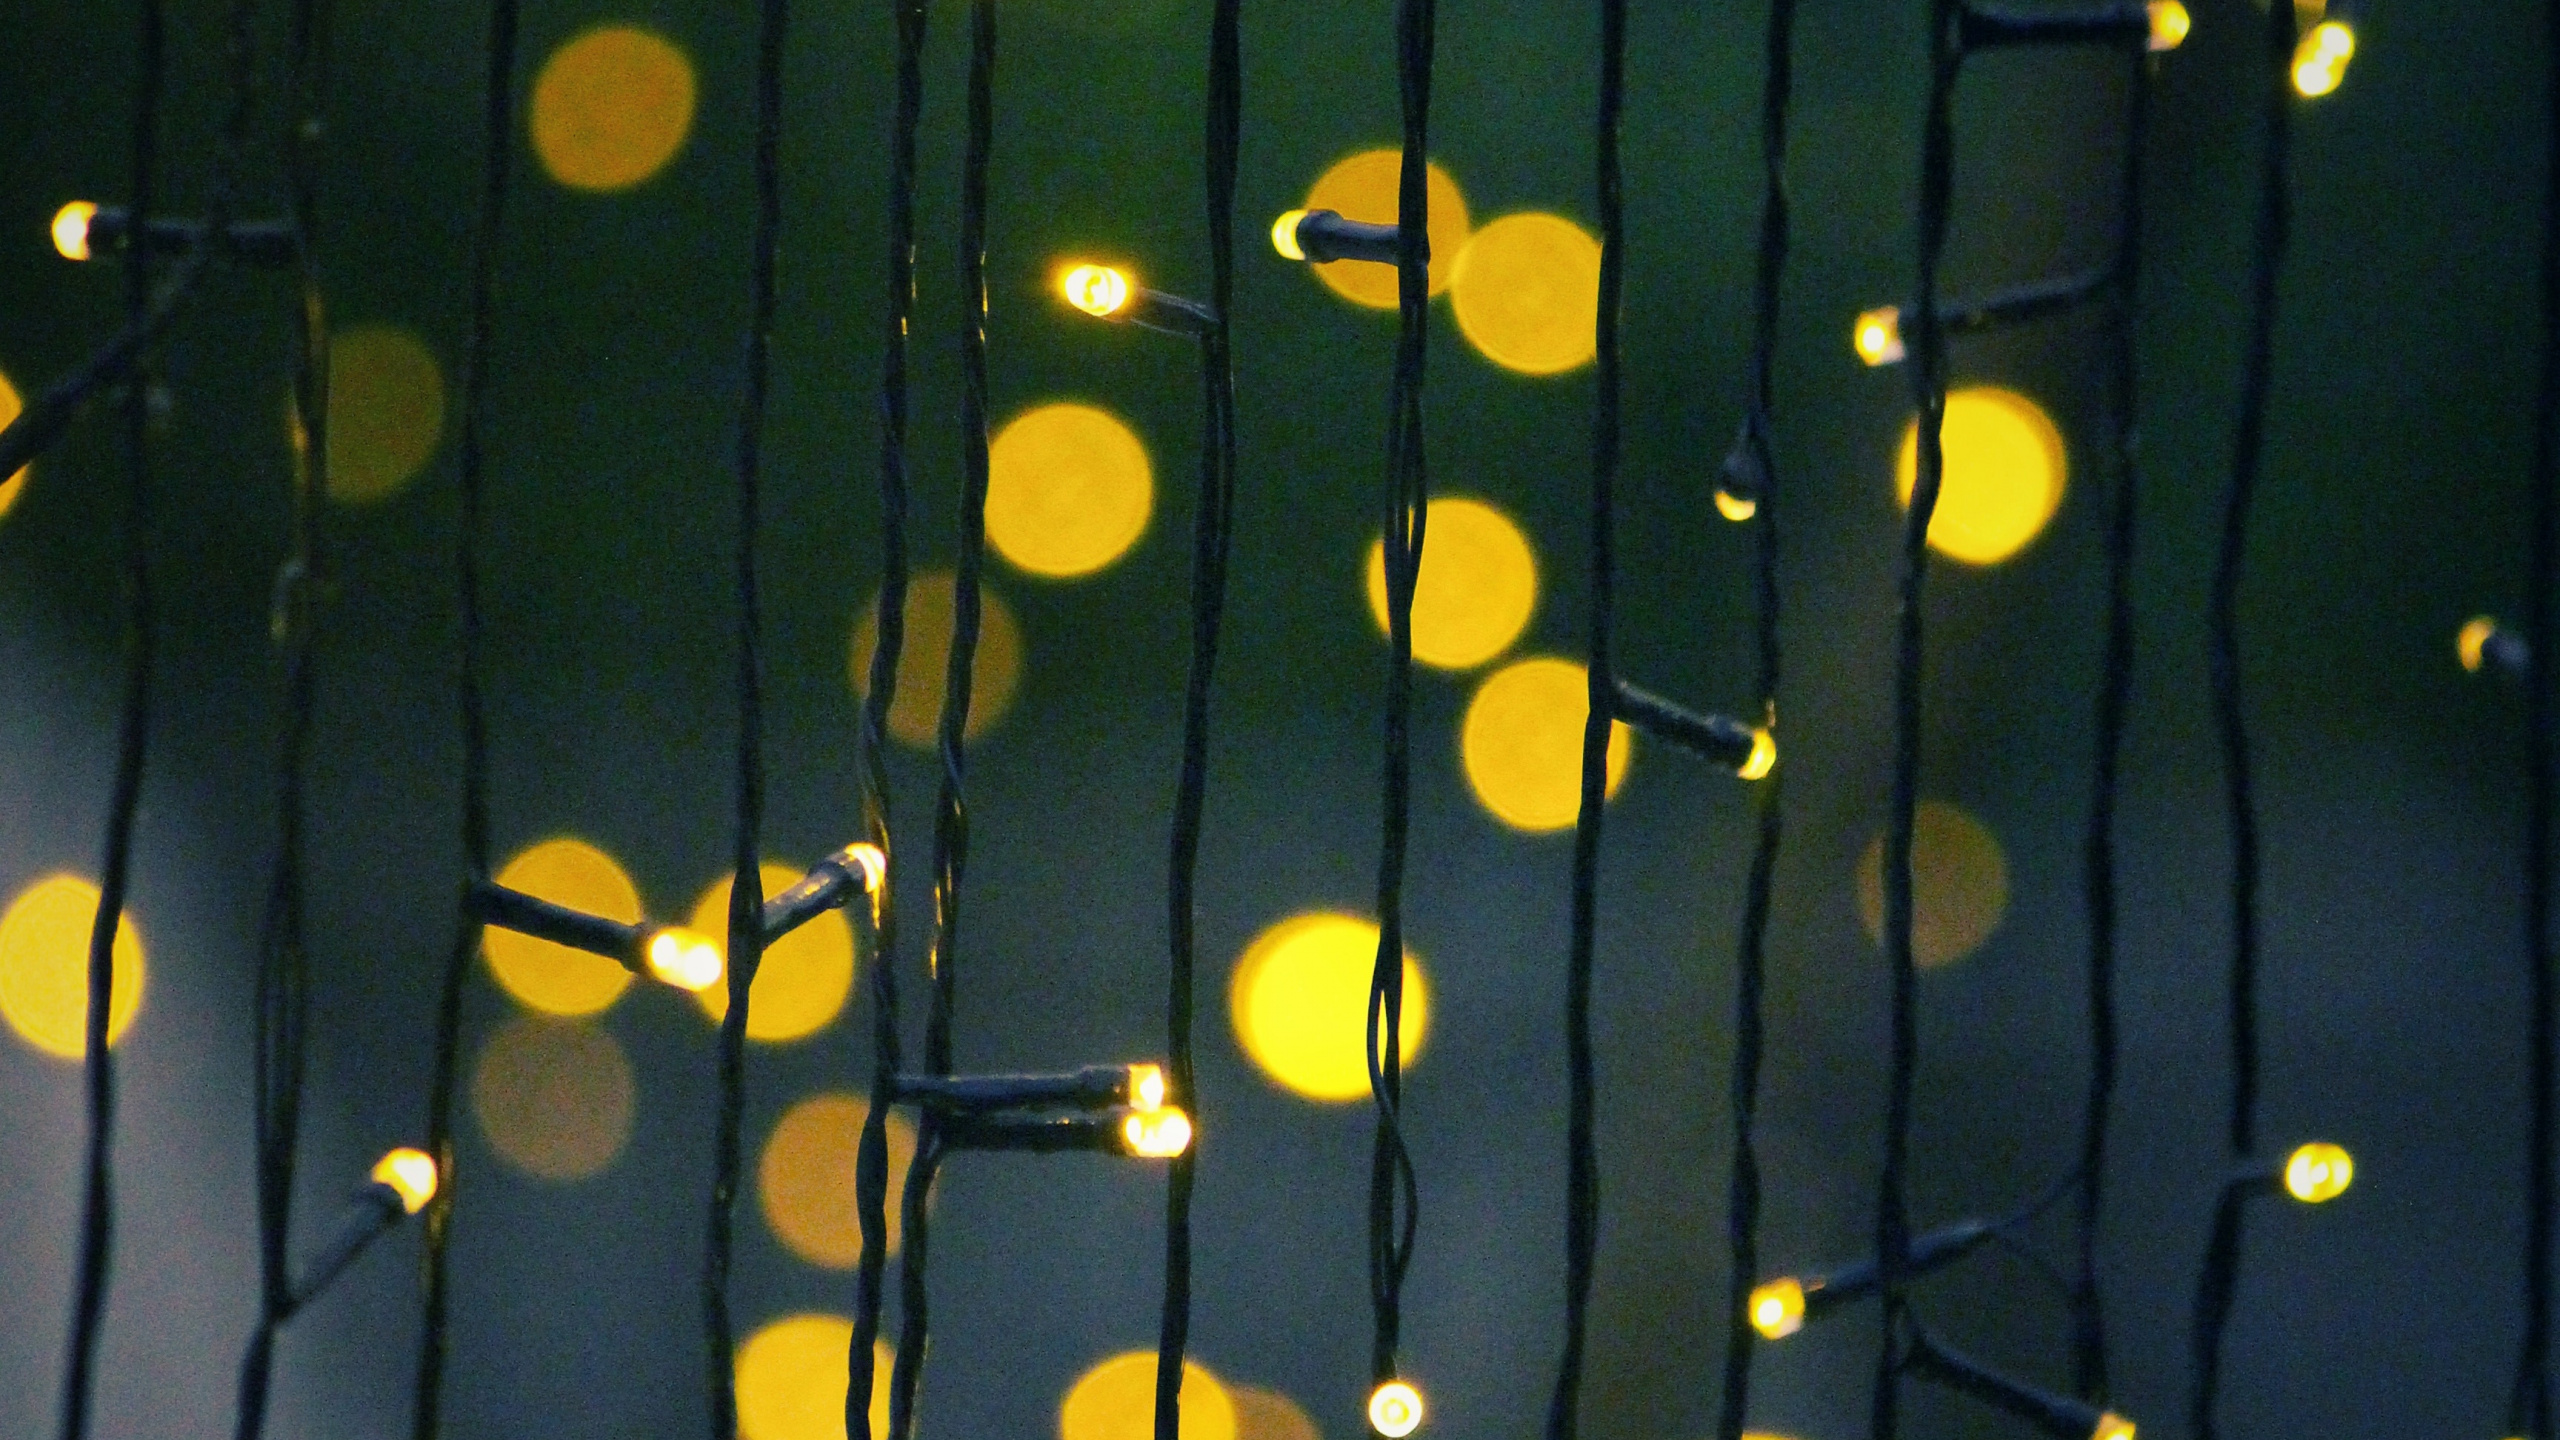 Yellow and White Polka Dot Textile. Wallpaper in 2560x1440 Resolution